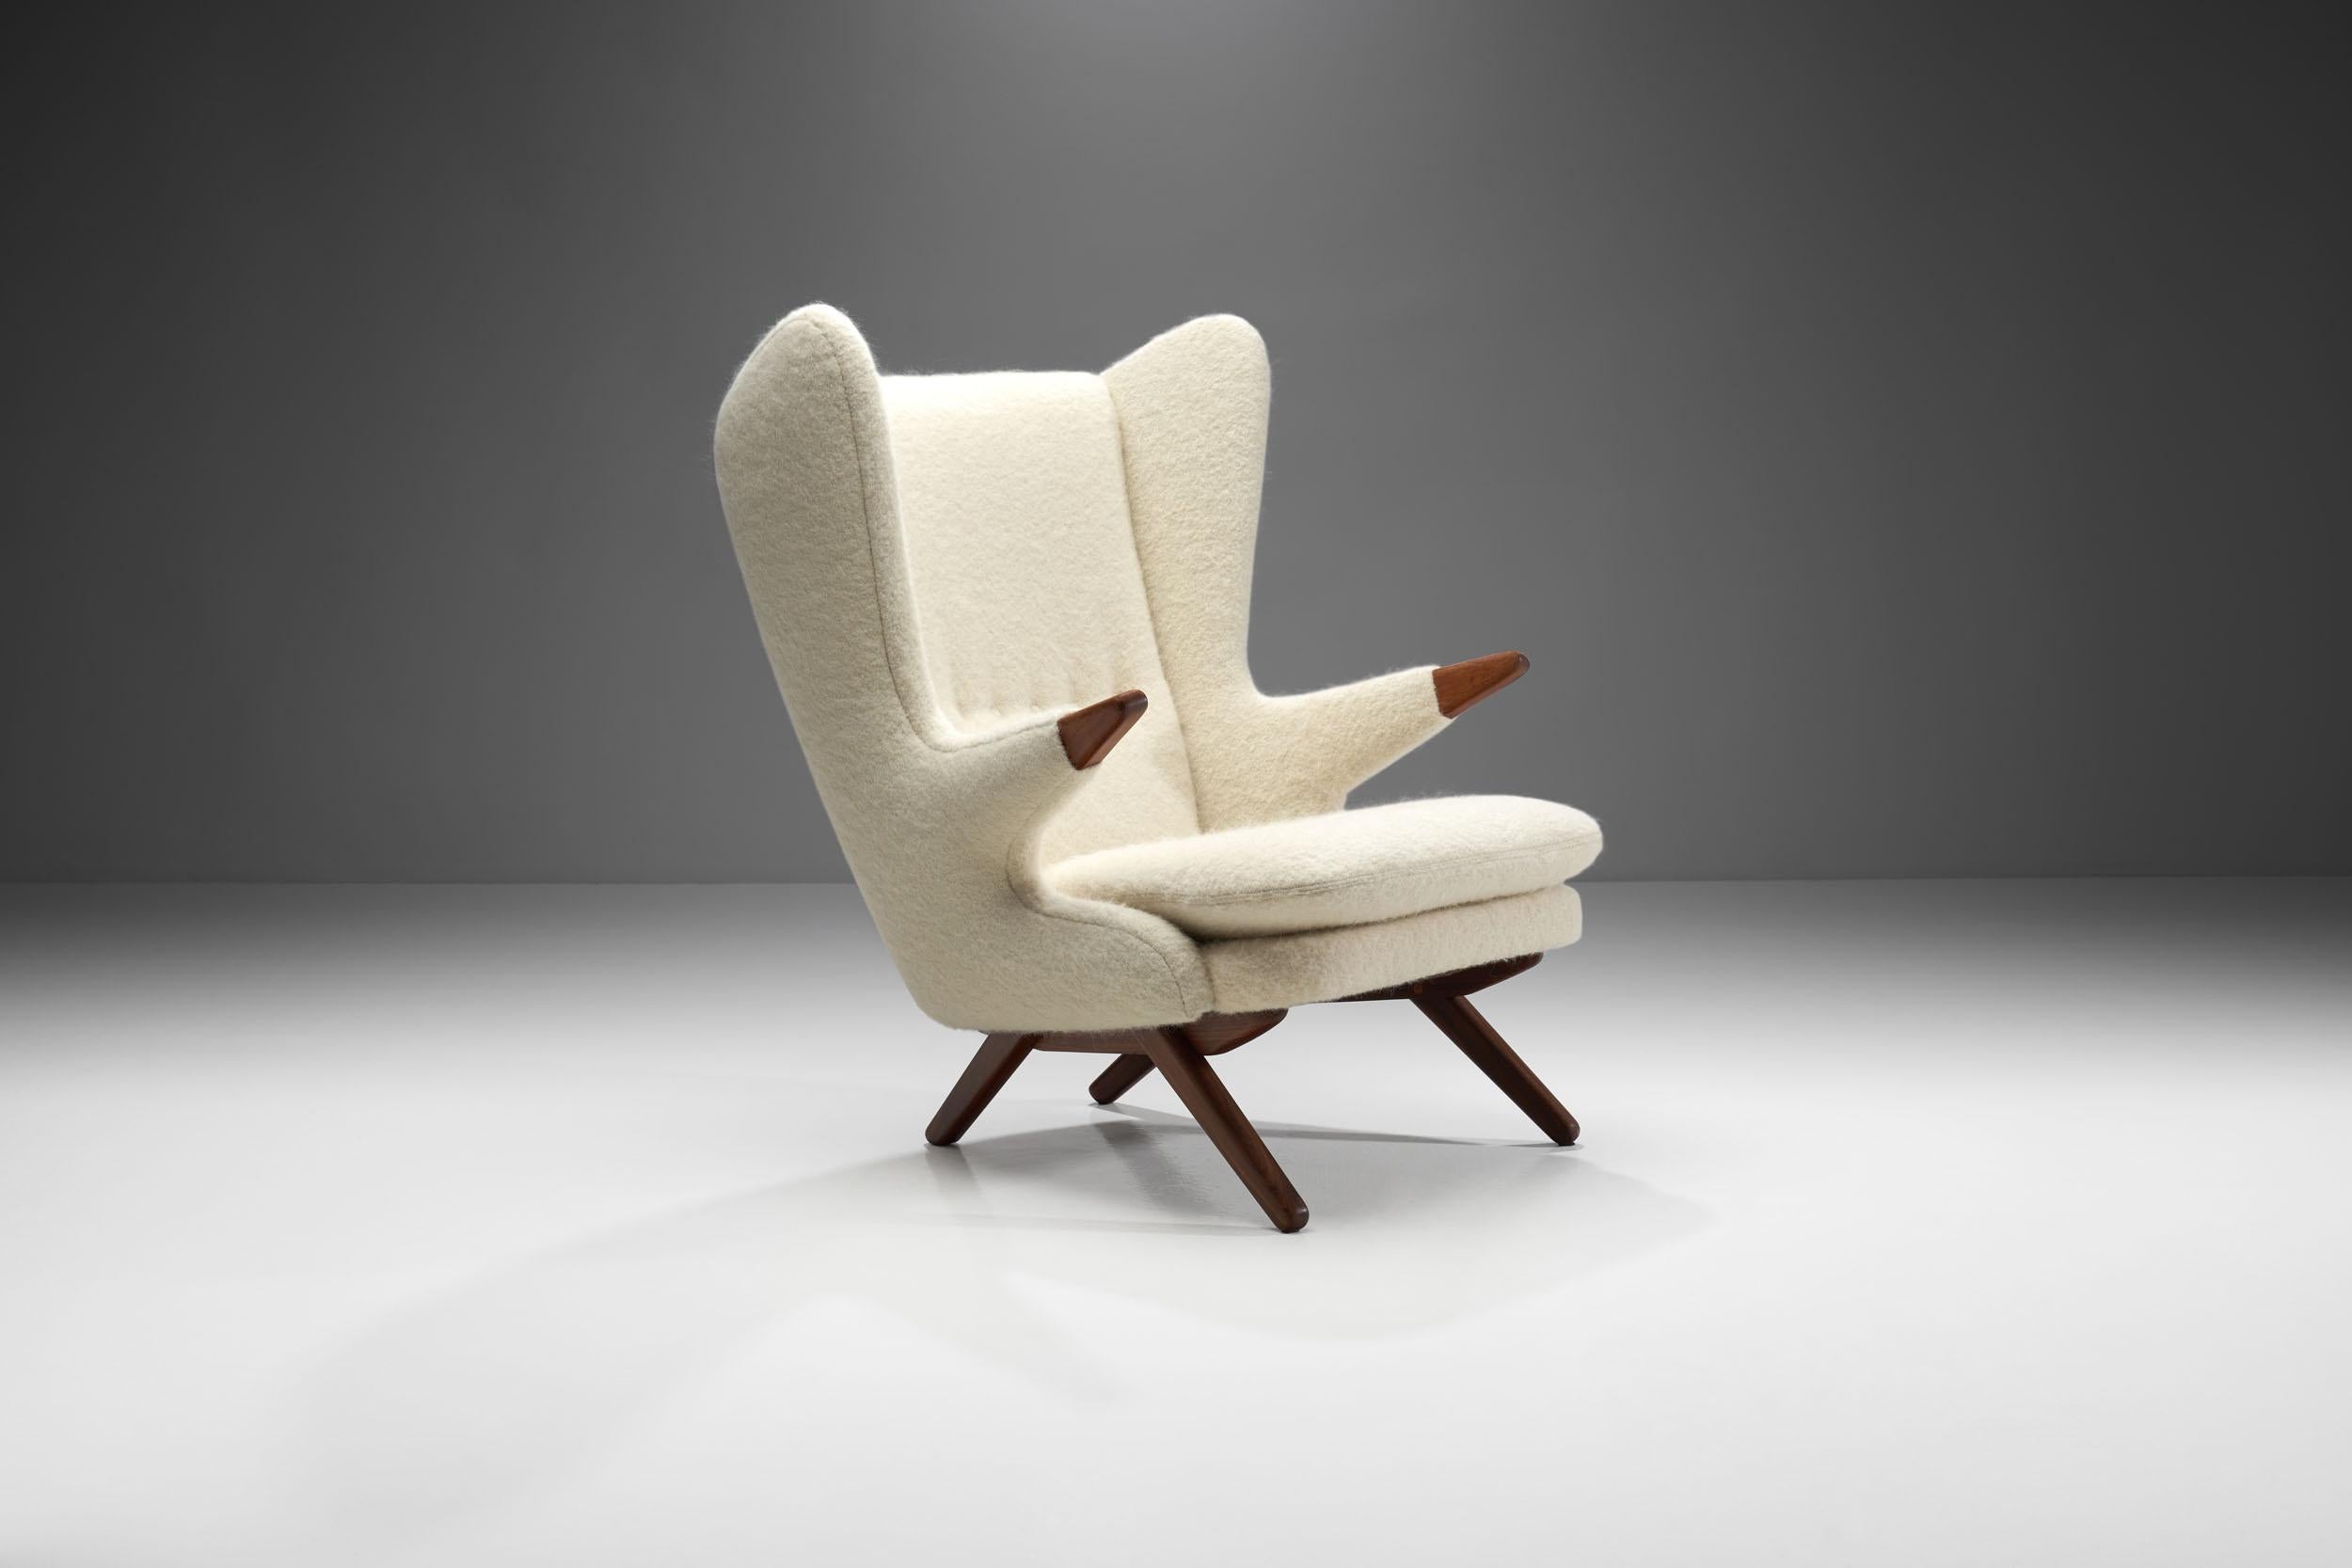 This chair is the most recognizable model of Danish designer and manufacturer, Svend Skipper, and a great example of the mid-century design era. Skipper only created commissioned pieces, meaning none of his designs were mass-produced.

“Model 91”